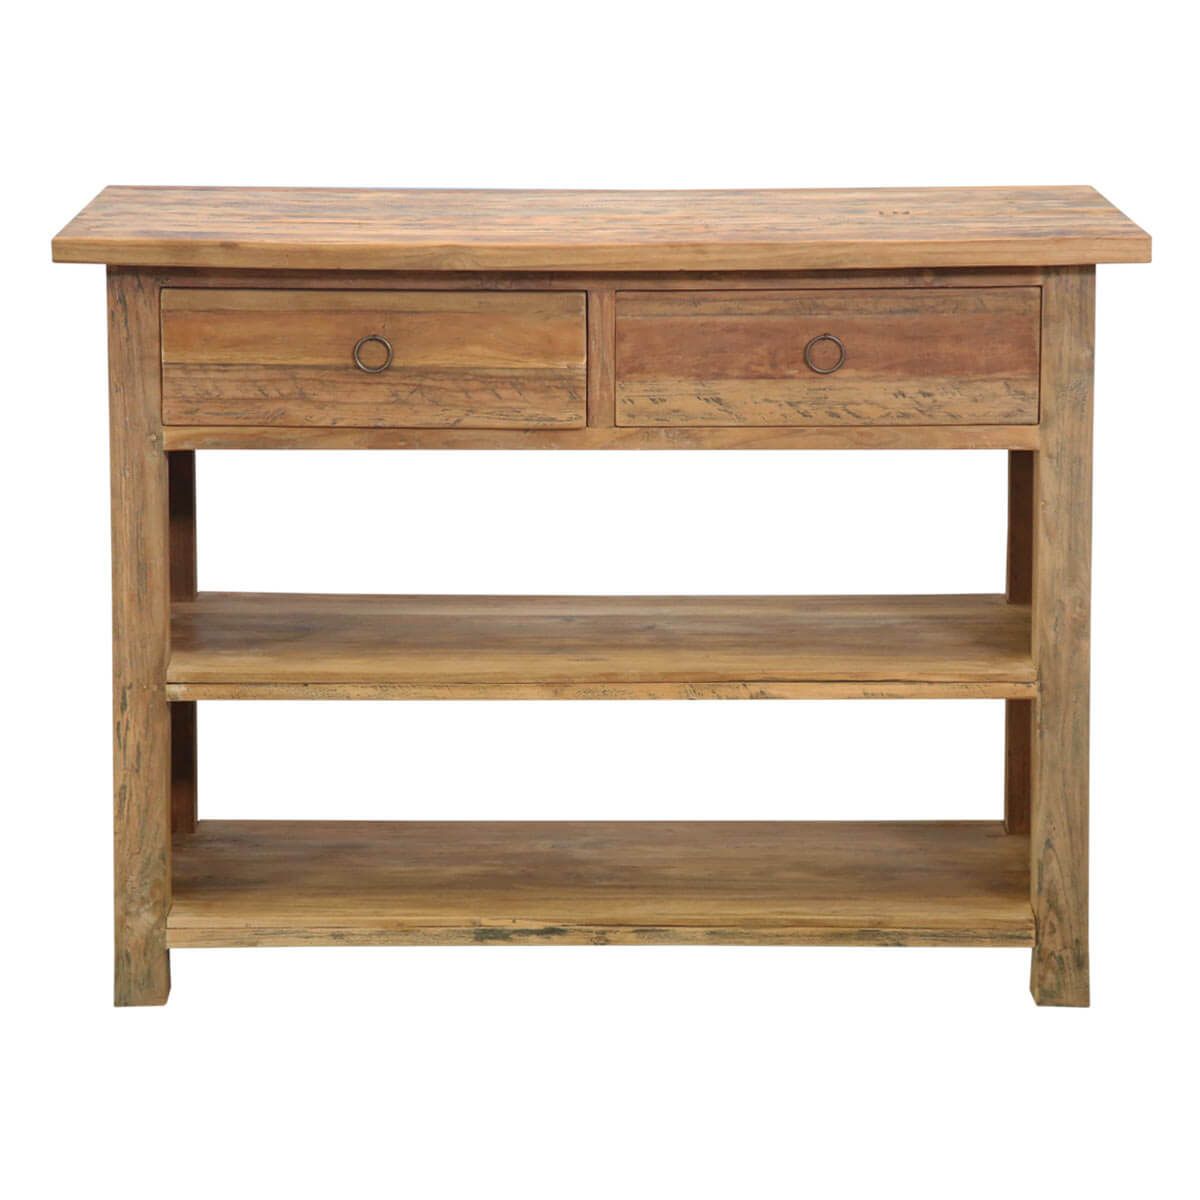 Lemont Simple Solid Teak Wood One Shelf 2 Drawer Console Table Within 2 Shelf Console Tables (View 8 of 20)